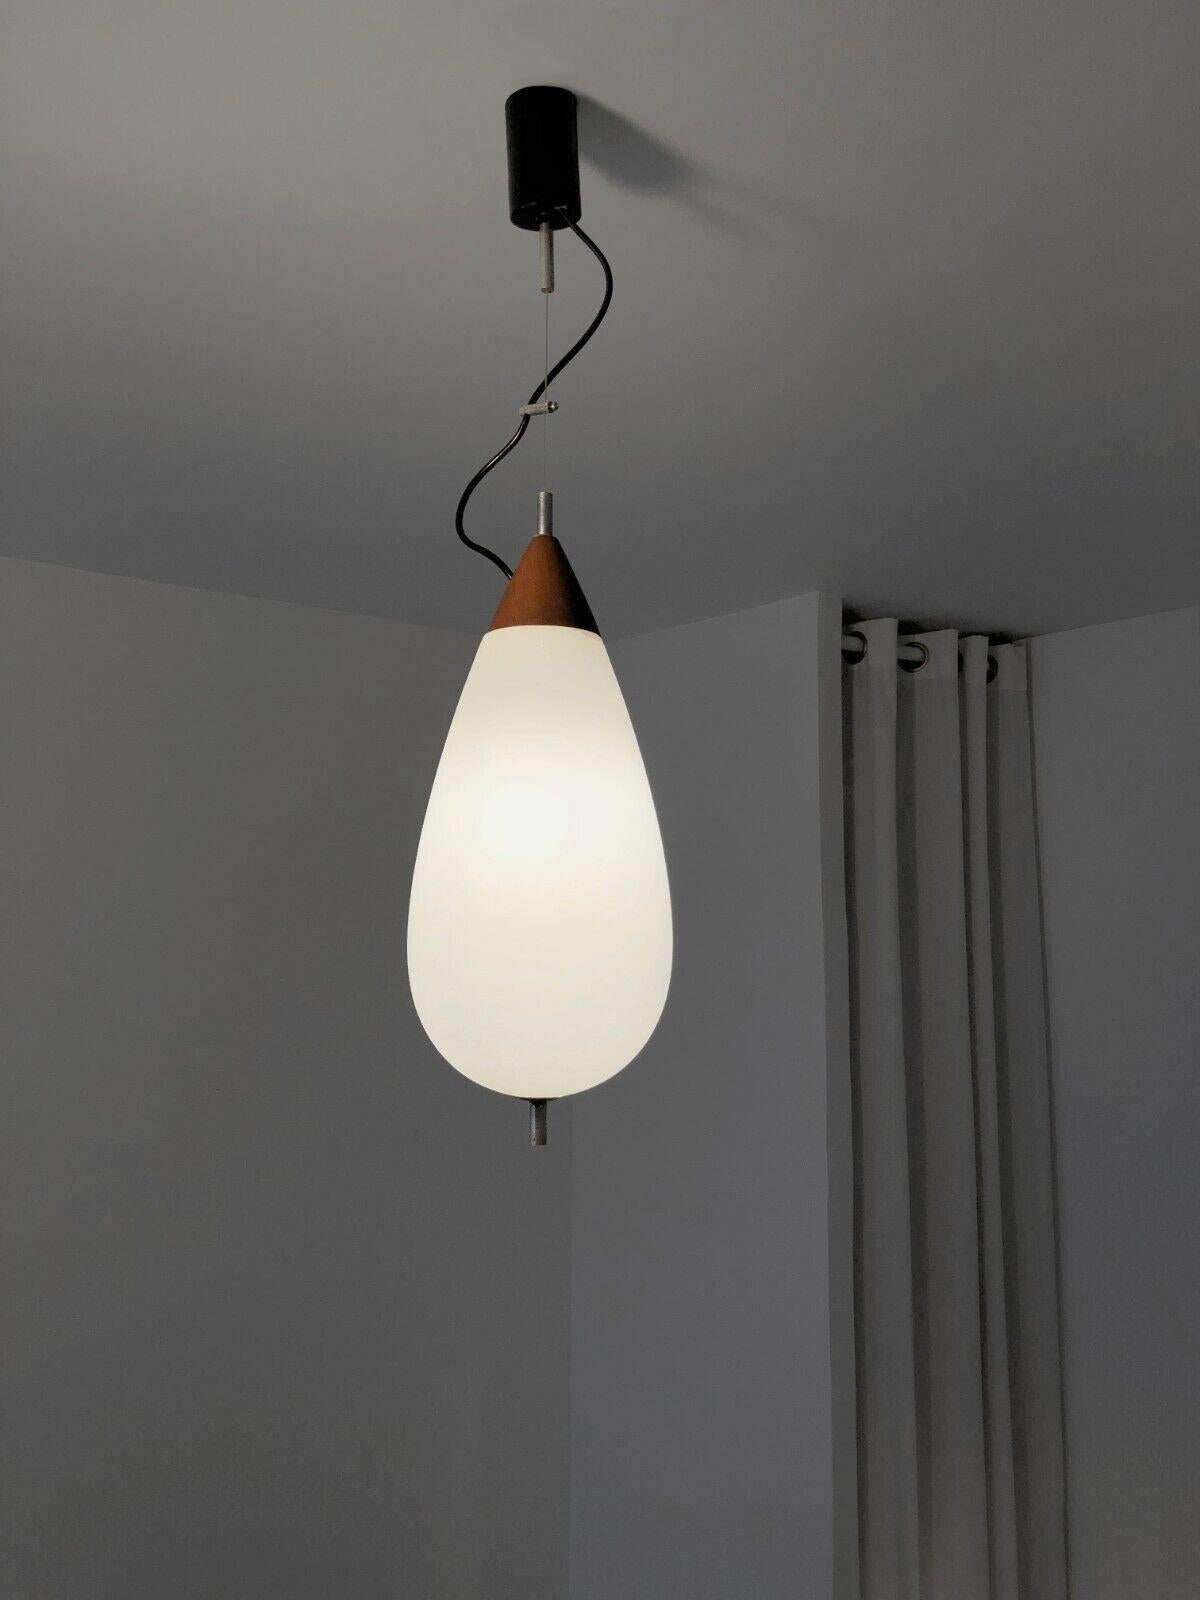 A sensual, graphic and airy pendant light, Modernist, Free-Form, Space-Age, with an ovoid drop body  diffusing white light, opaline glass mounted on a red-brown wooden base, modular structure with iron wire and black electric wire creating a